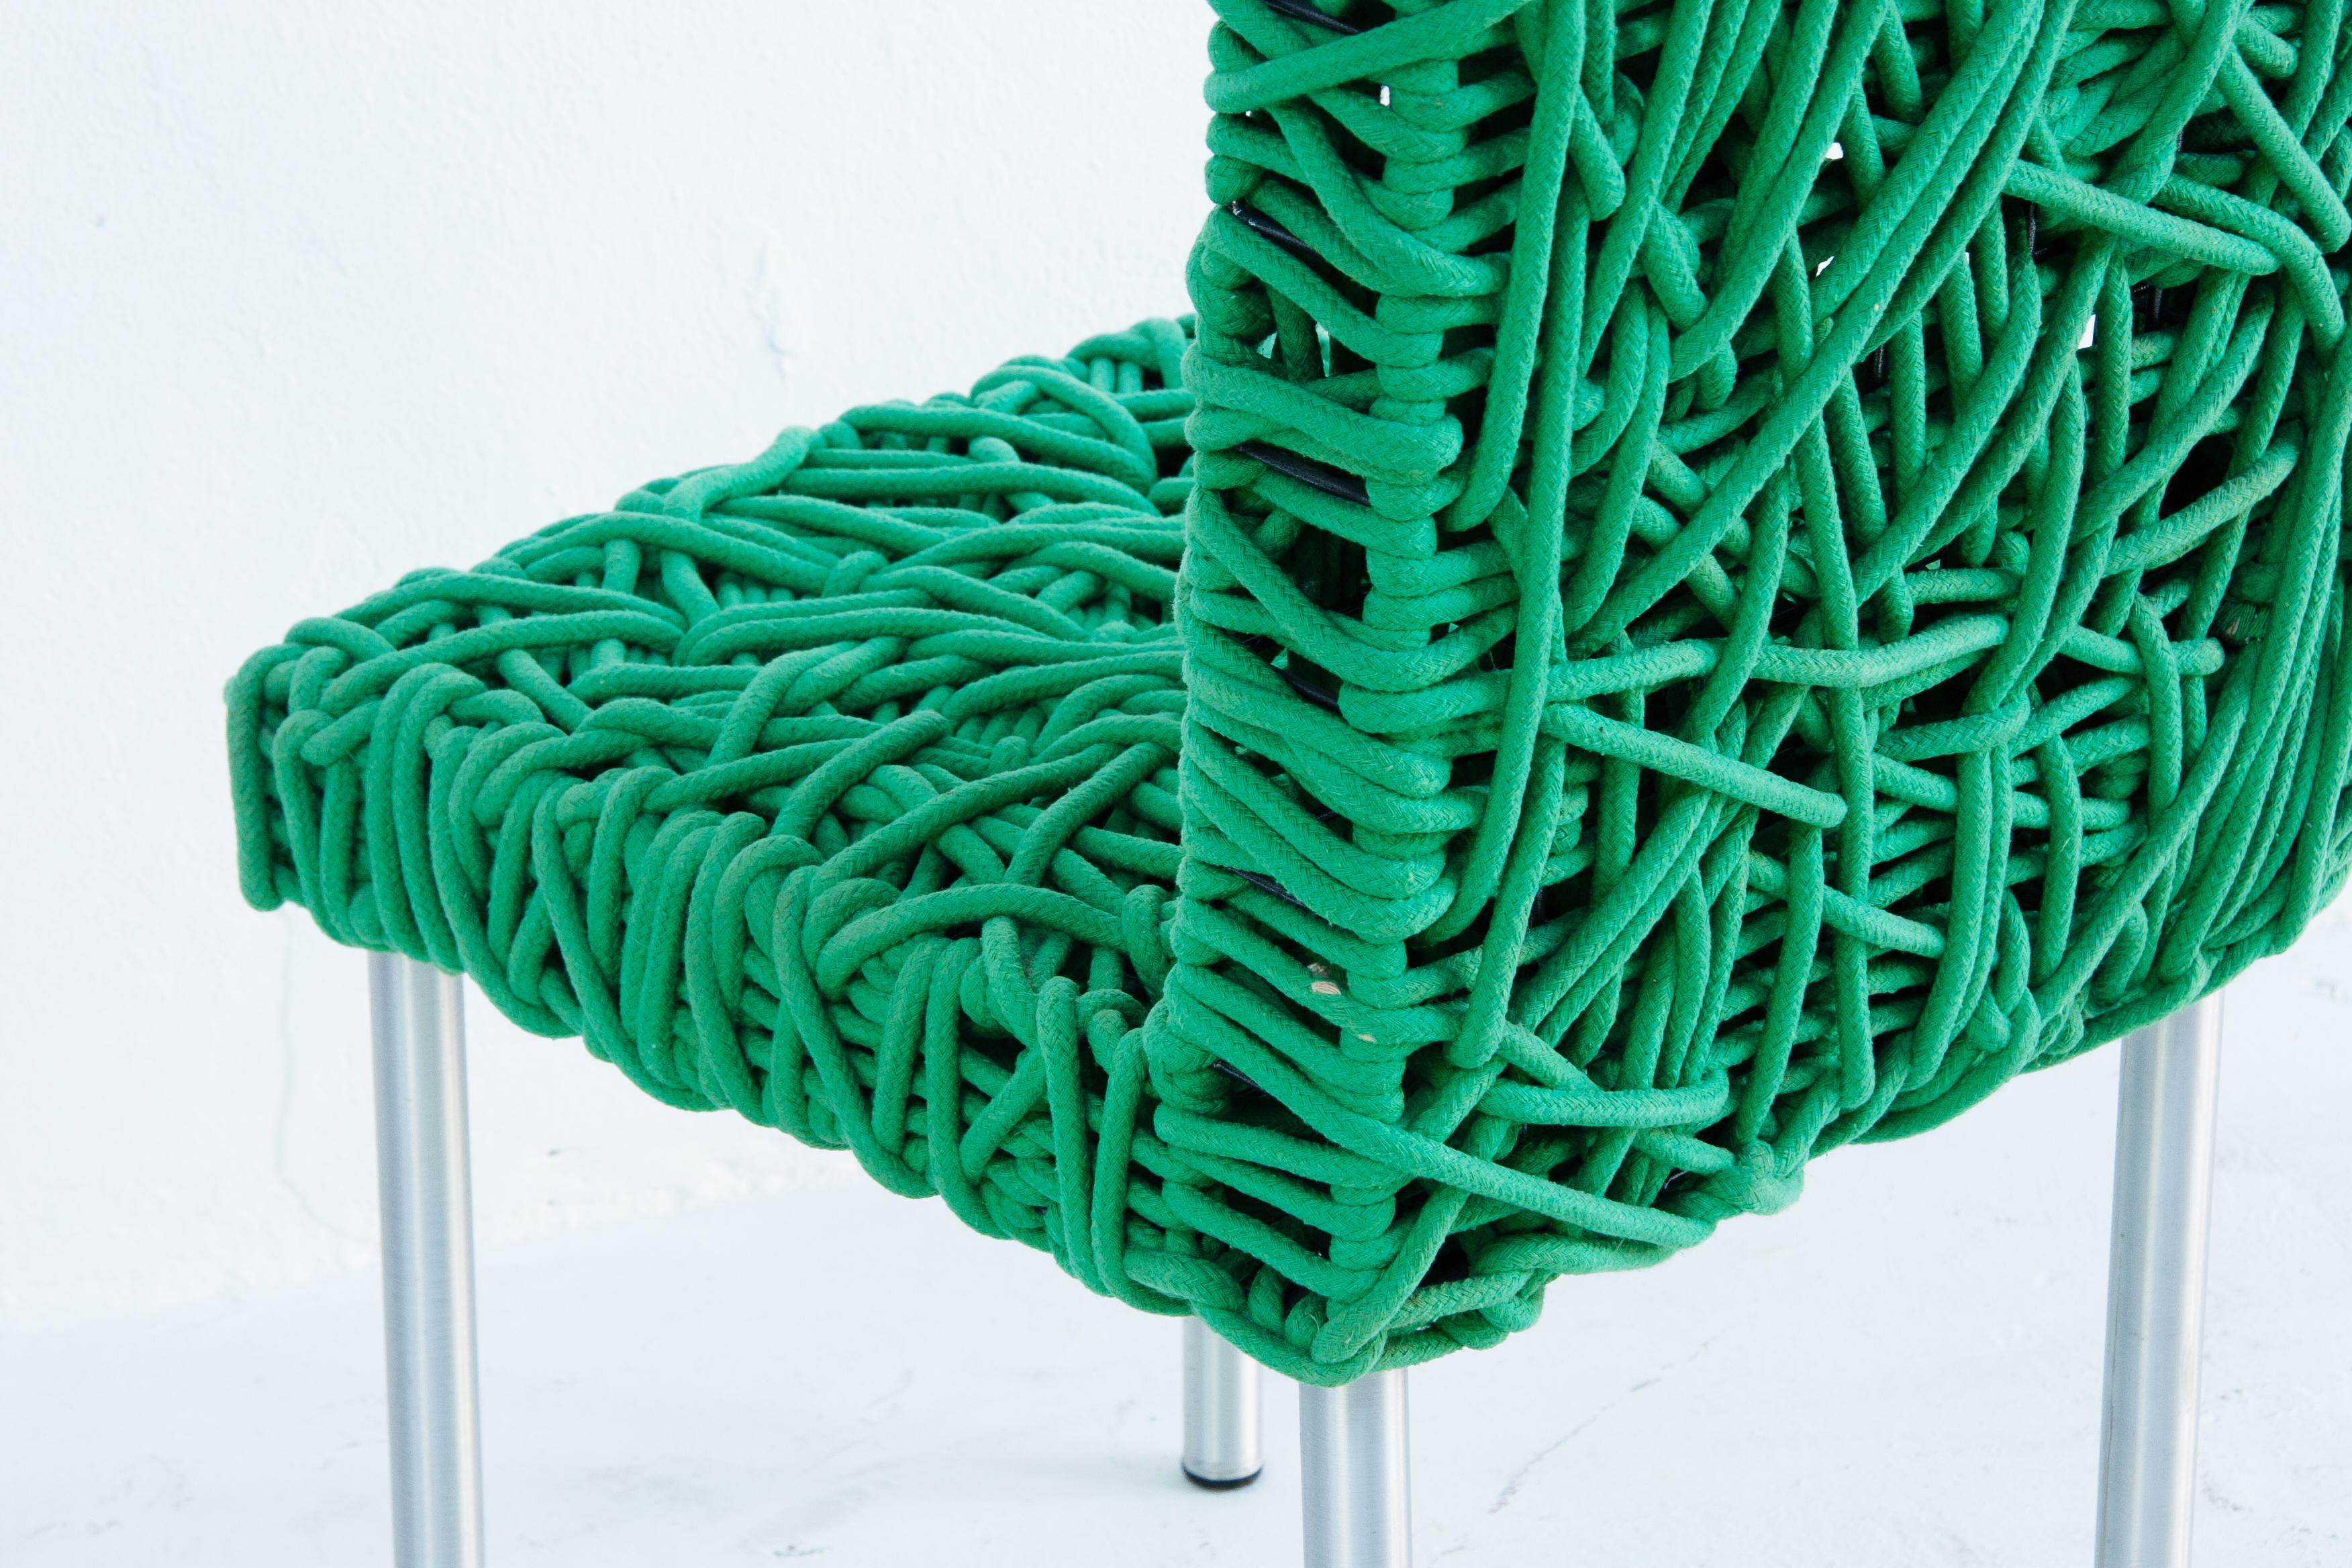 The Verde Side Chair by Campana Brothers for Edra is a unique design piece made with a stainless steel frame and a seat woven from green cotton cords, hand-knotted into a web-like pattern. It creates a playful and whimsical appearance while also